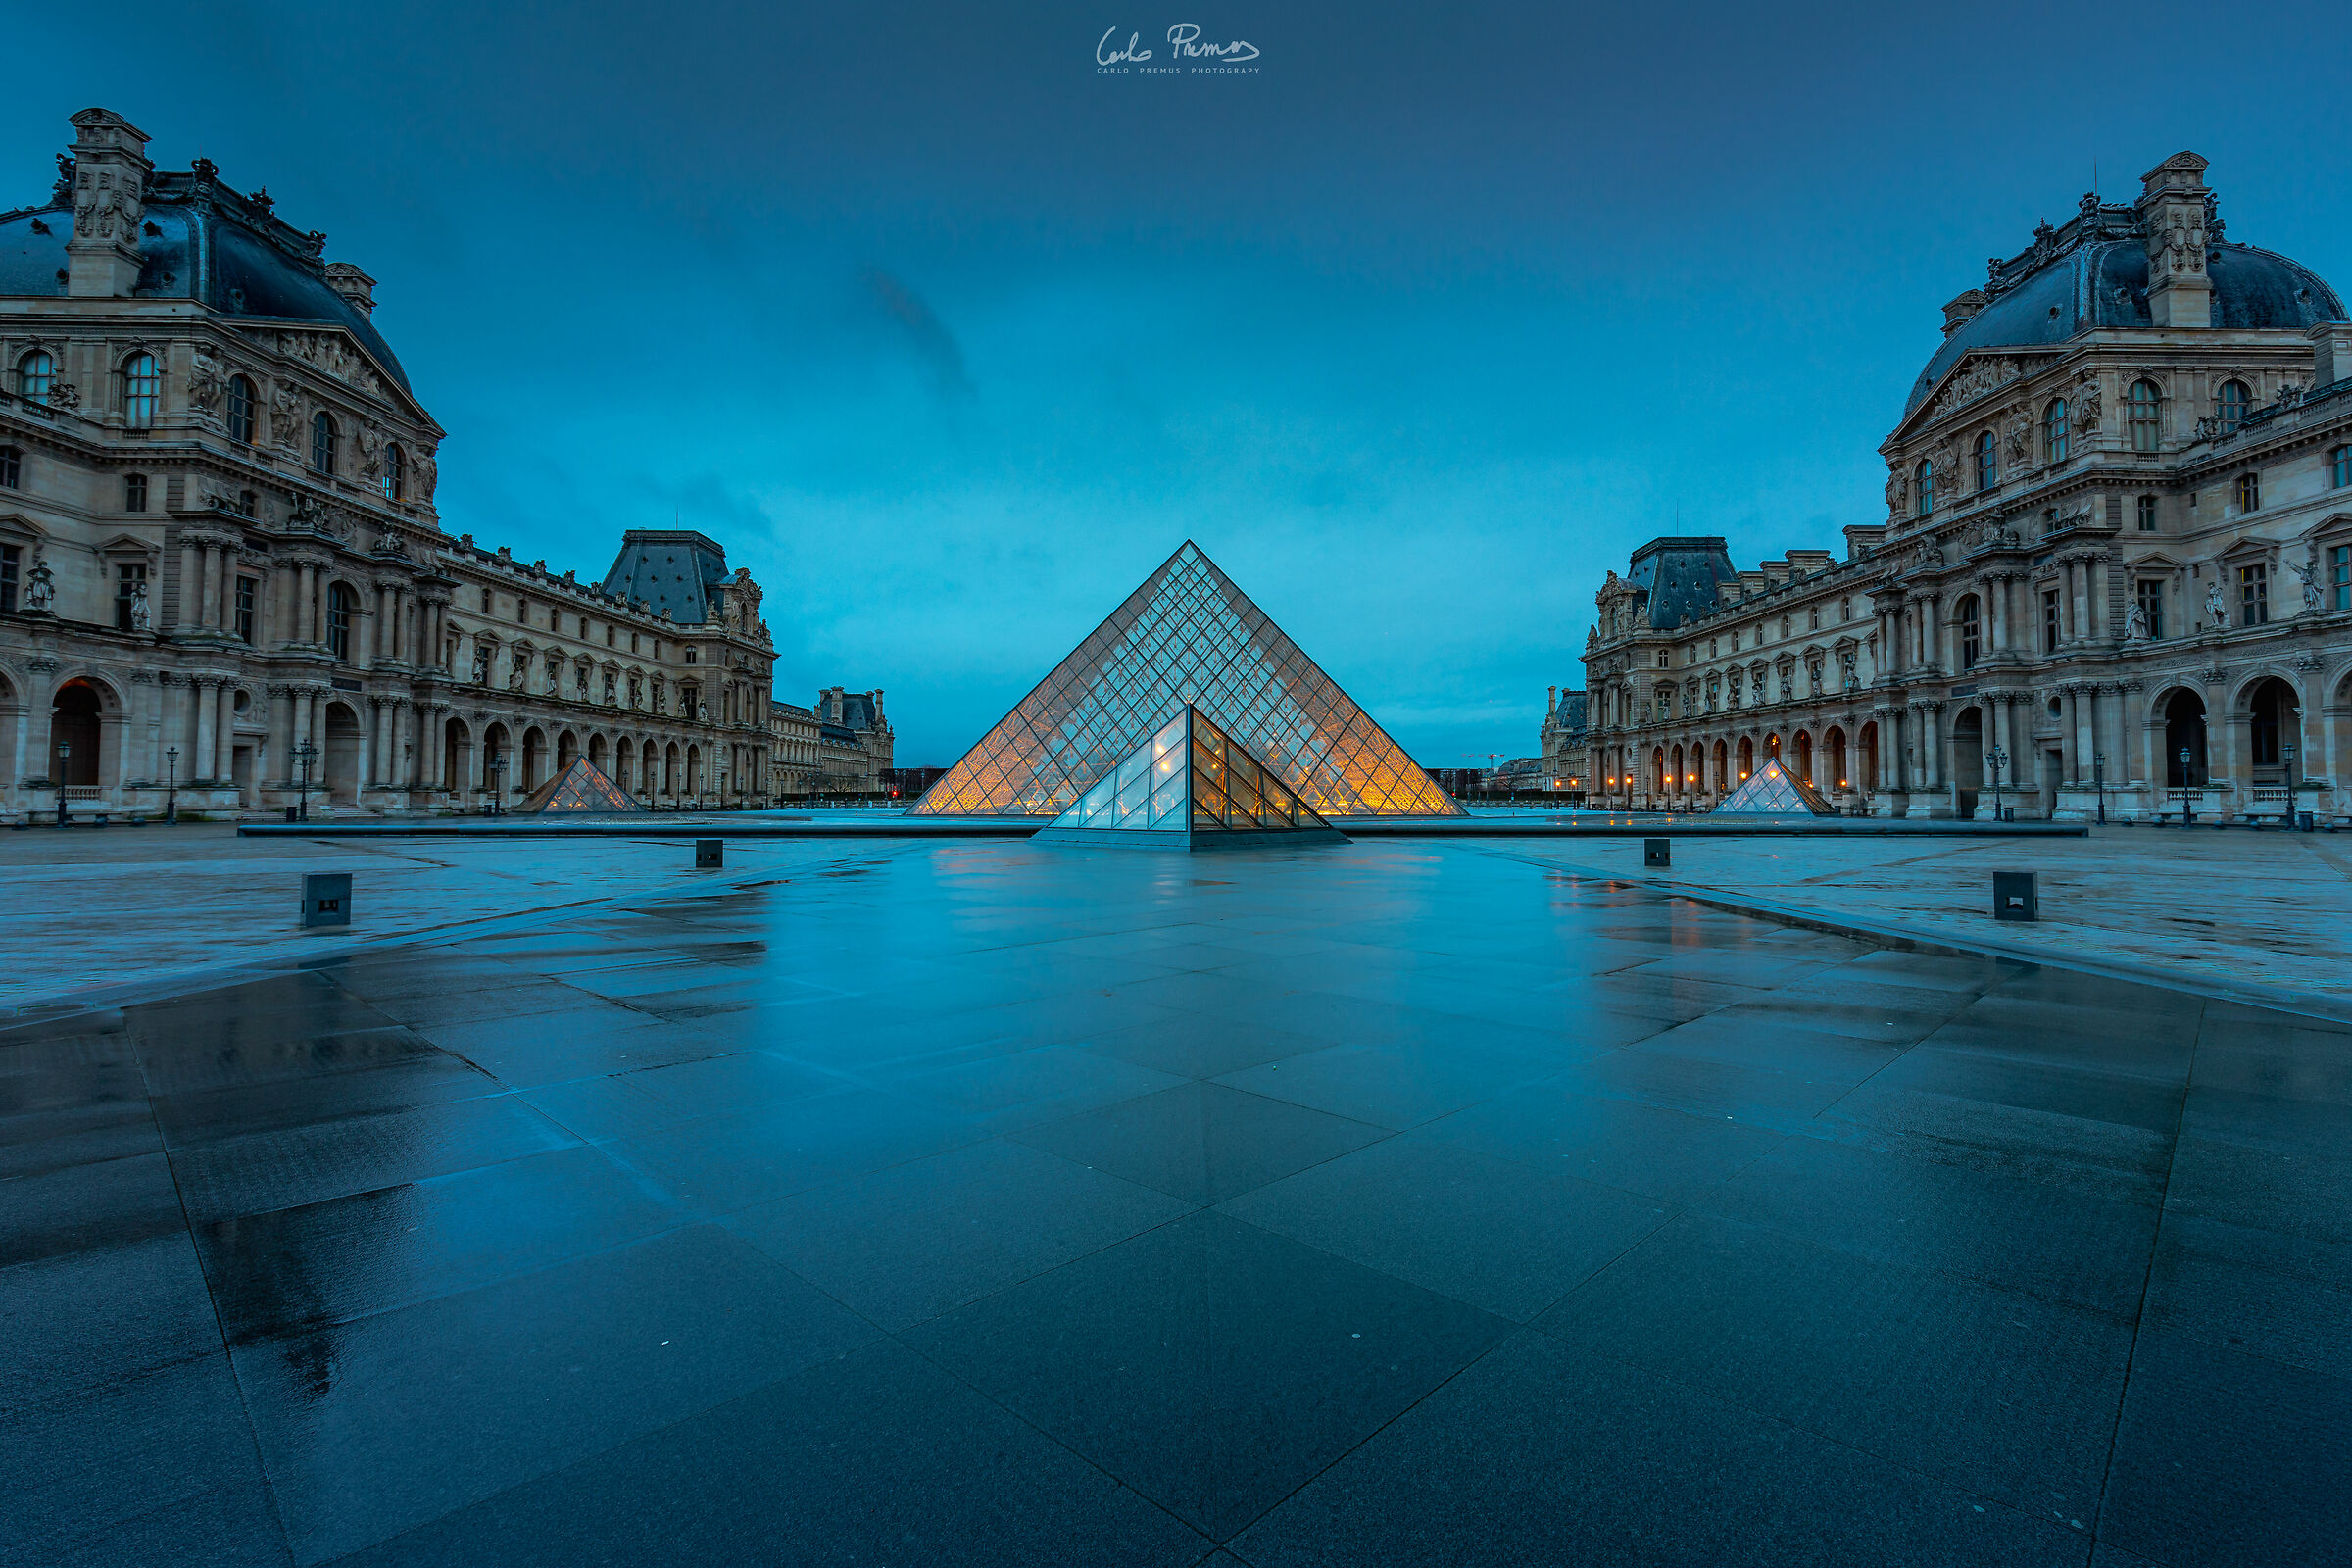 The Pyramid of the Louvre, Paris...